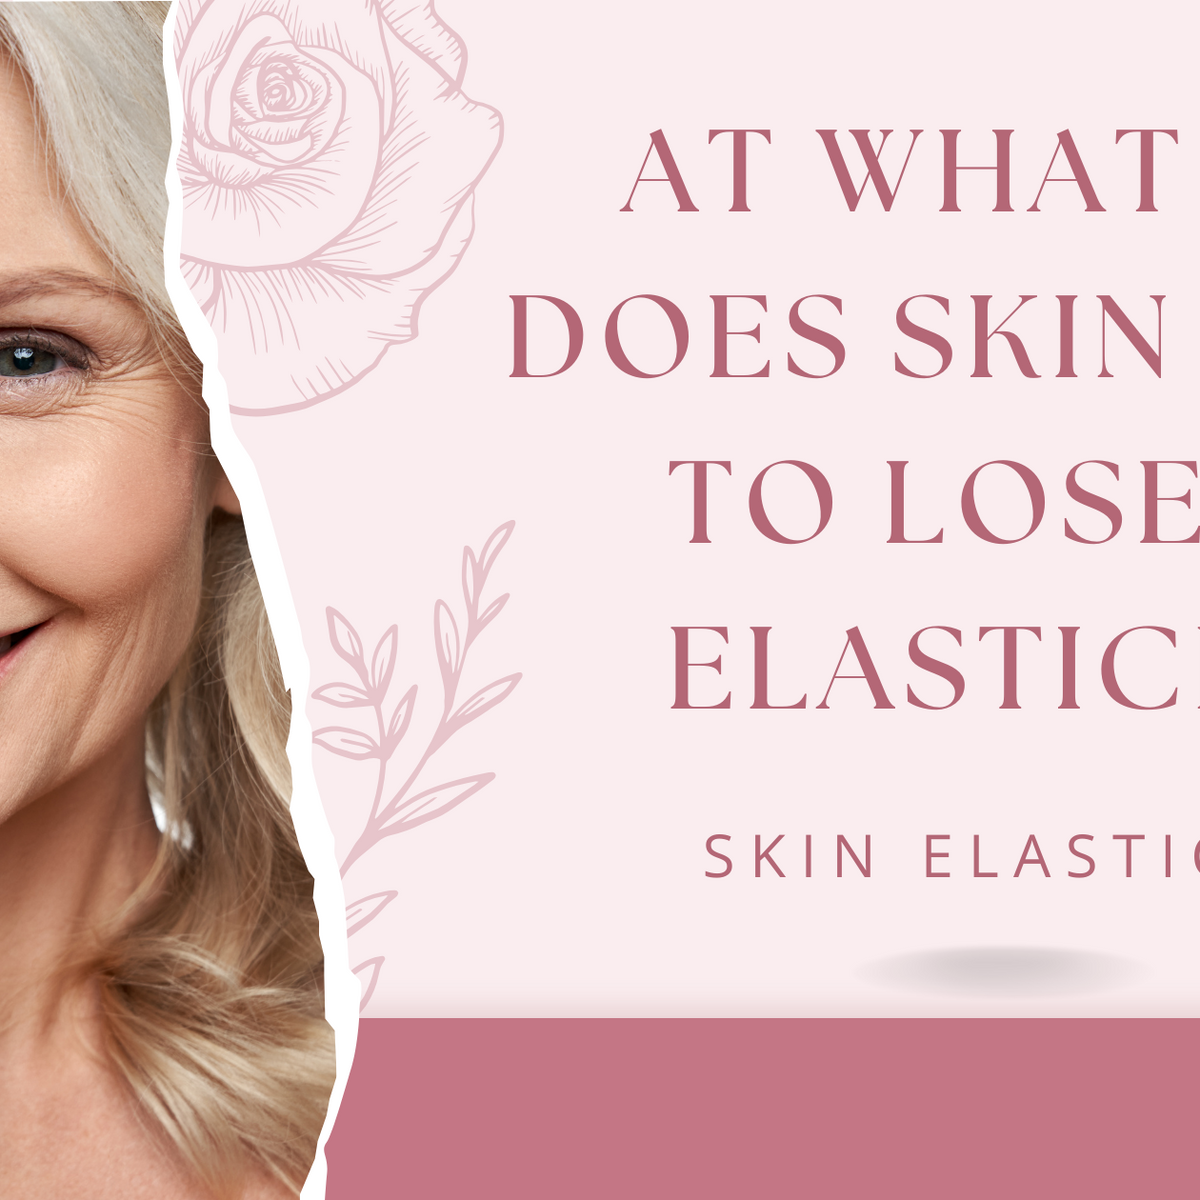 Have a look at elasticity of the skin. #Skin elasticity is the